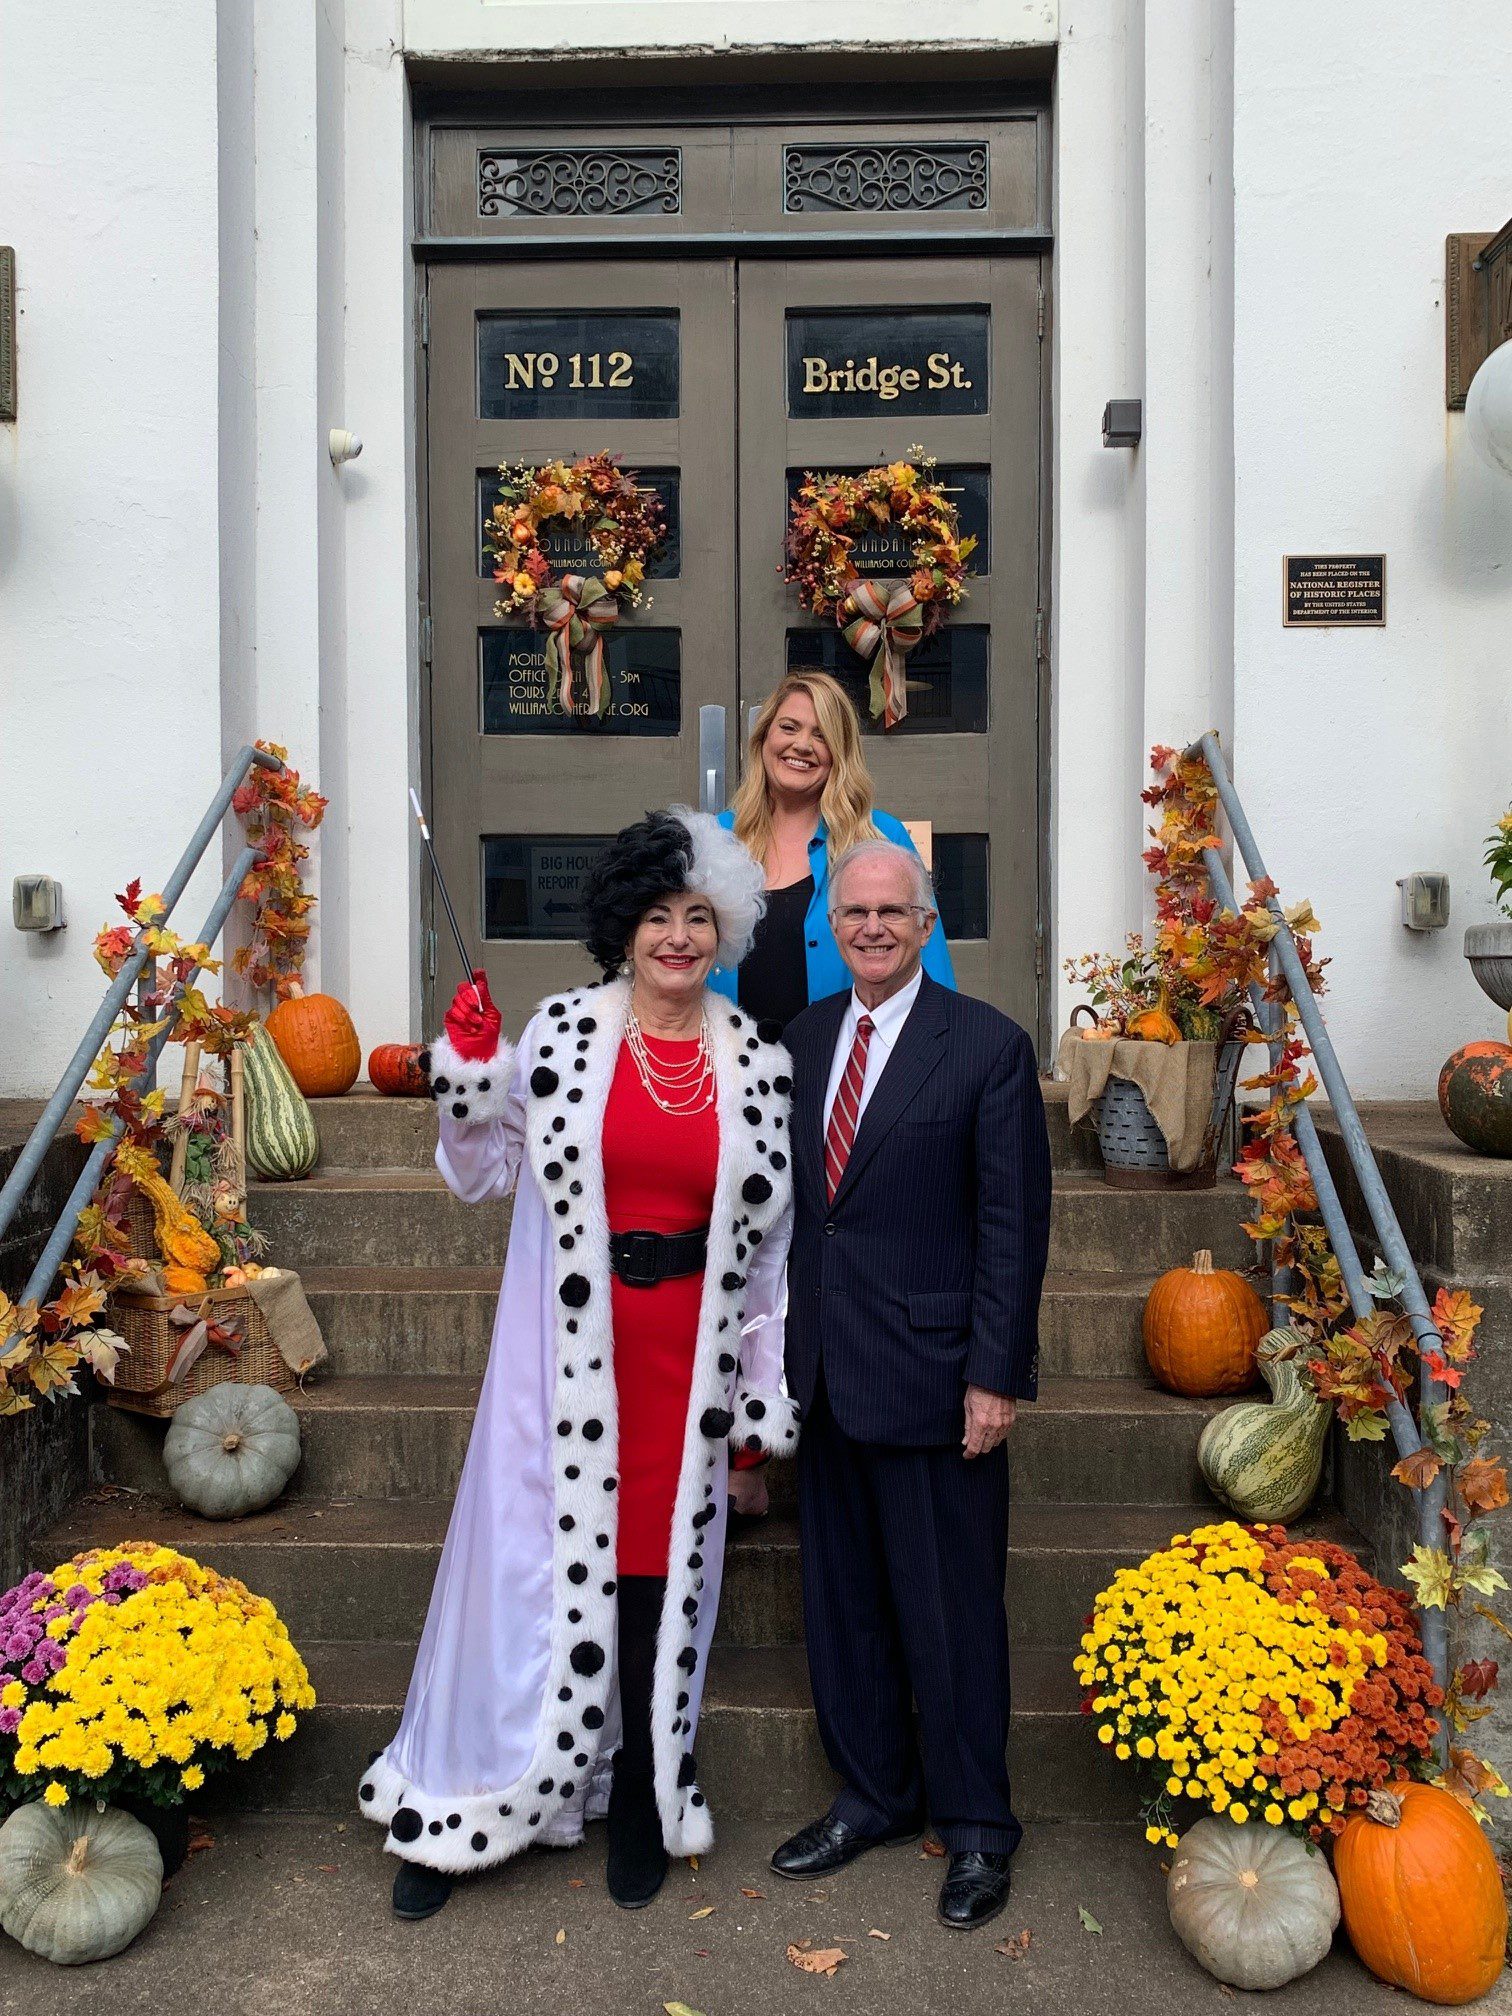 Cruella costume at PumpkinFest, a downtown Franklin, TN festival with fall food and drink, children’s activities, live music, costume contest for pets and families, and outstanding arts and crafts featuring seasonal and specialty gift items.